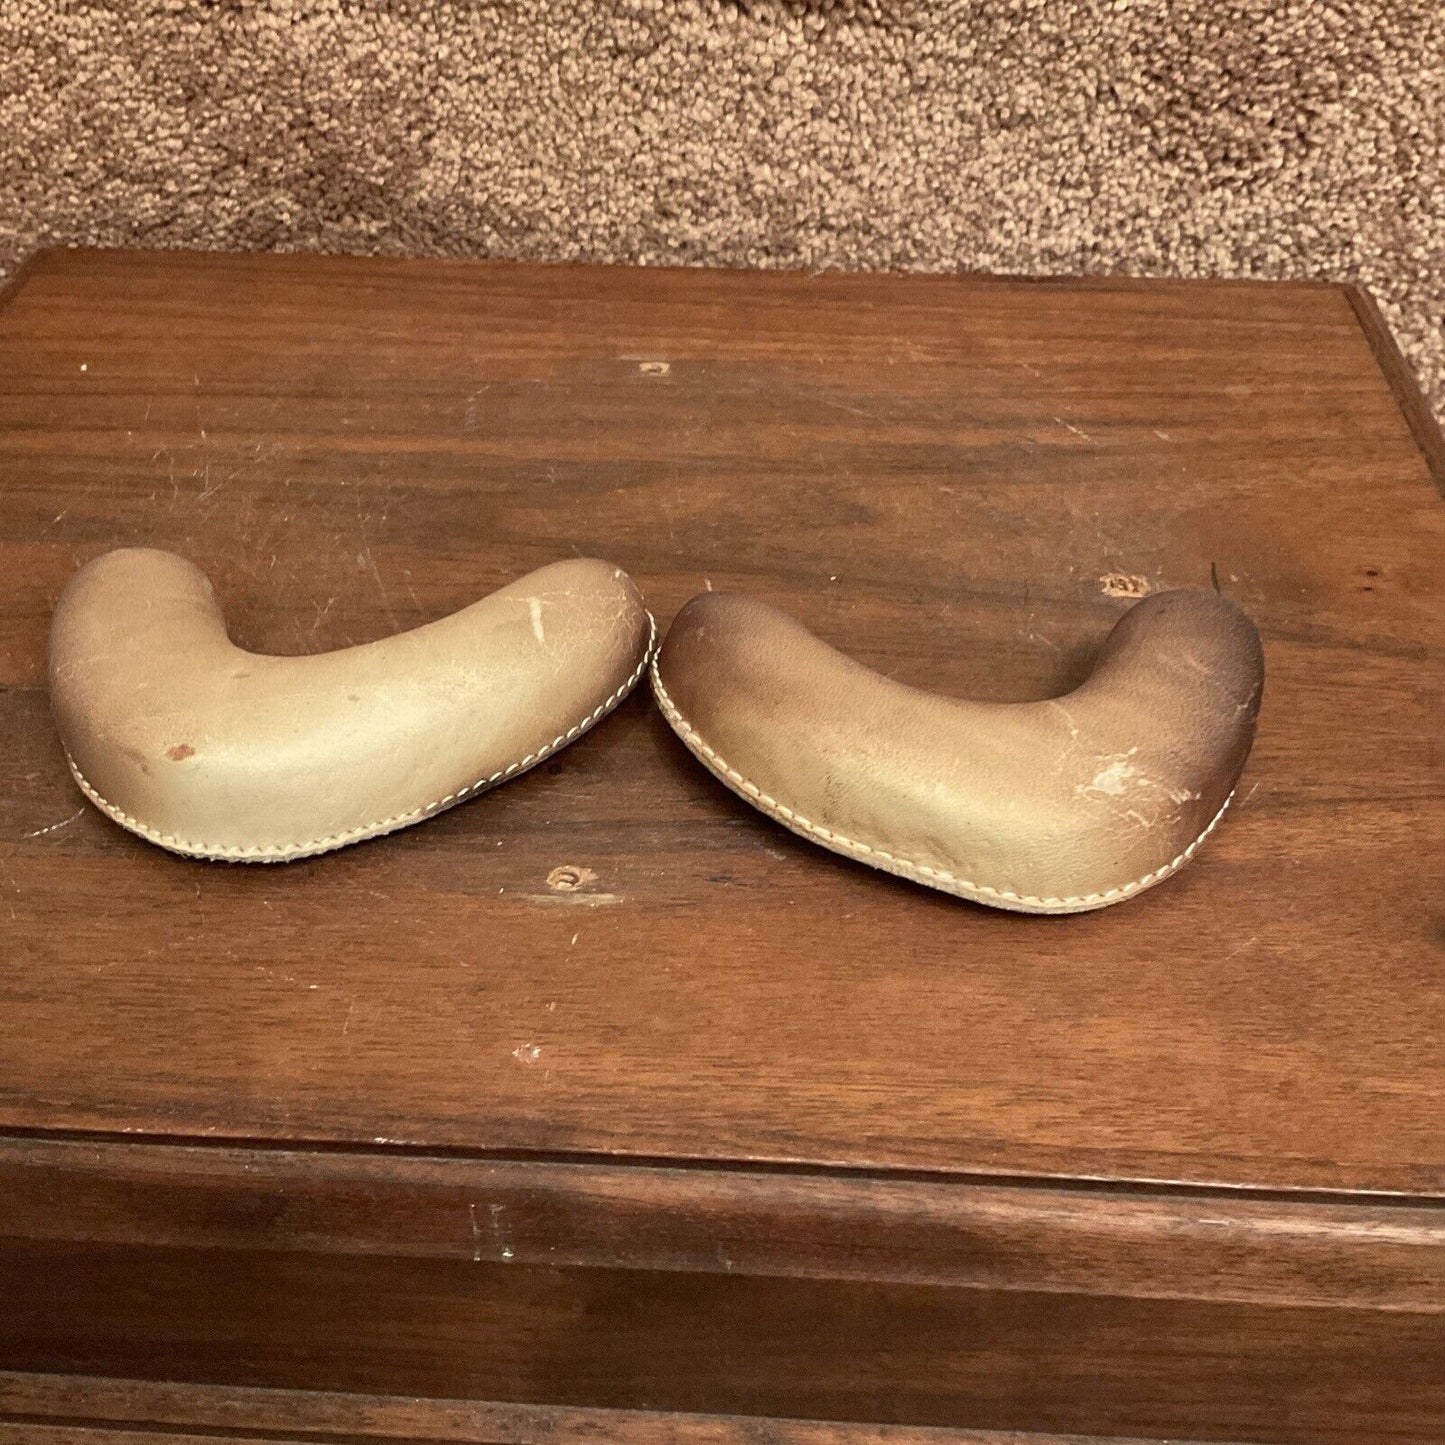 Authentic Vintage Riddell X-Large Football Helmet Jaw Pads still pliable Sporting Goods:Team Sports:Football:Clothing, Shoes & Accessories:Helmets & Hats Riddell   